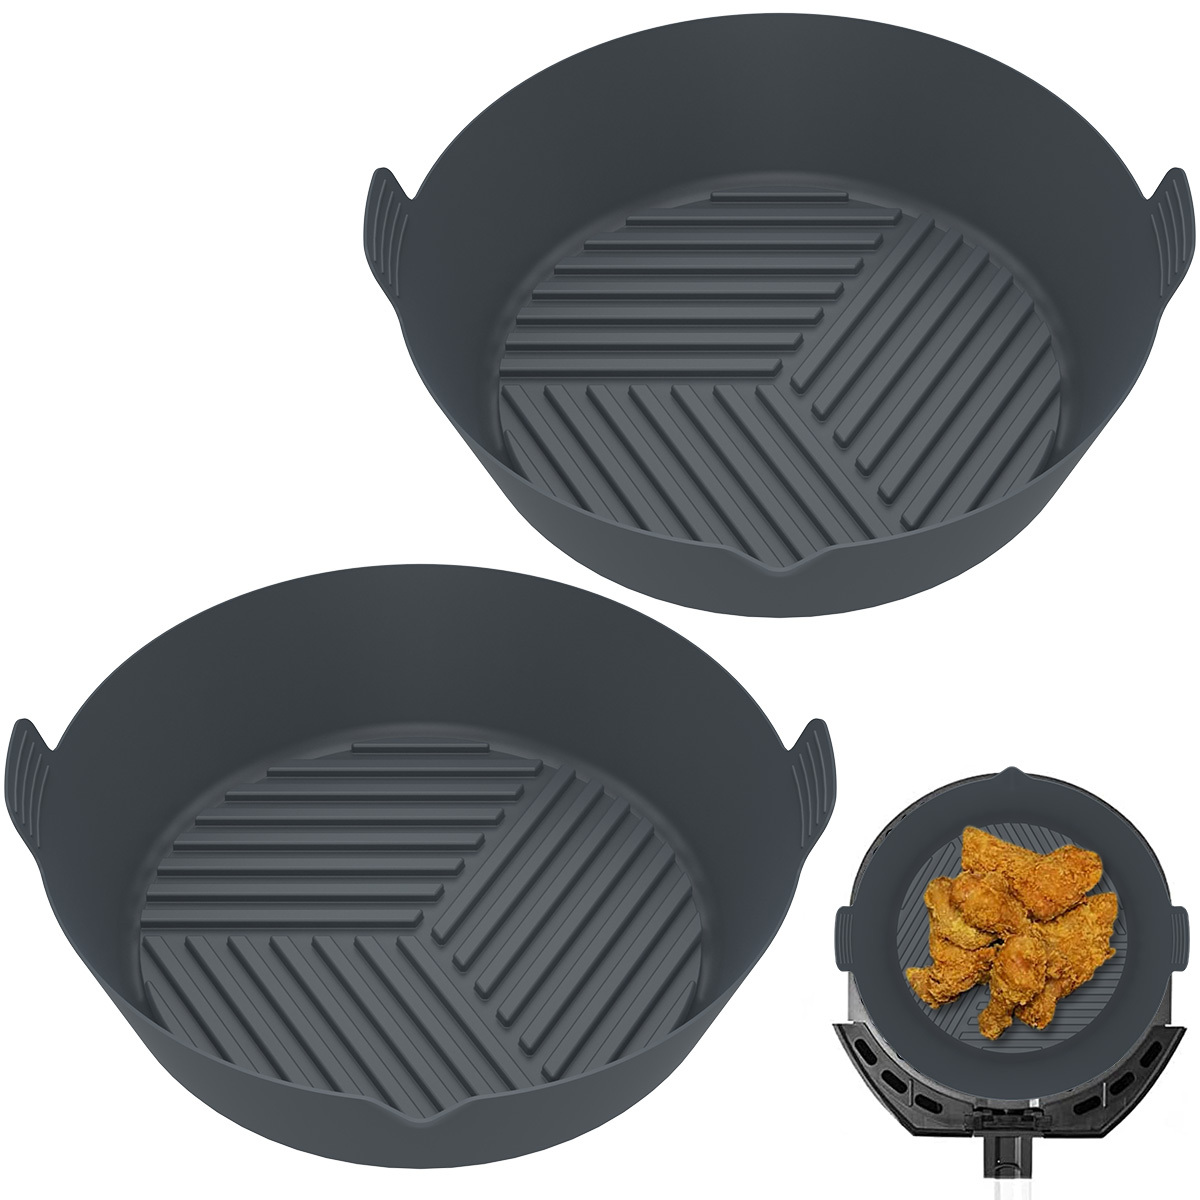 Replacement Air Fryer Basket Cast Iron Air Fryer Replacement